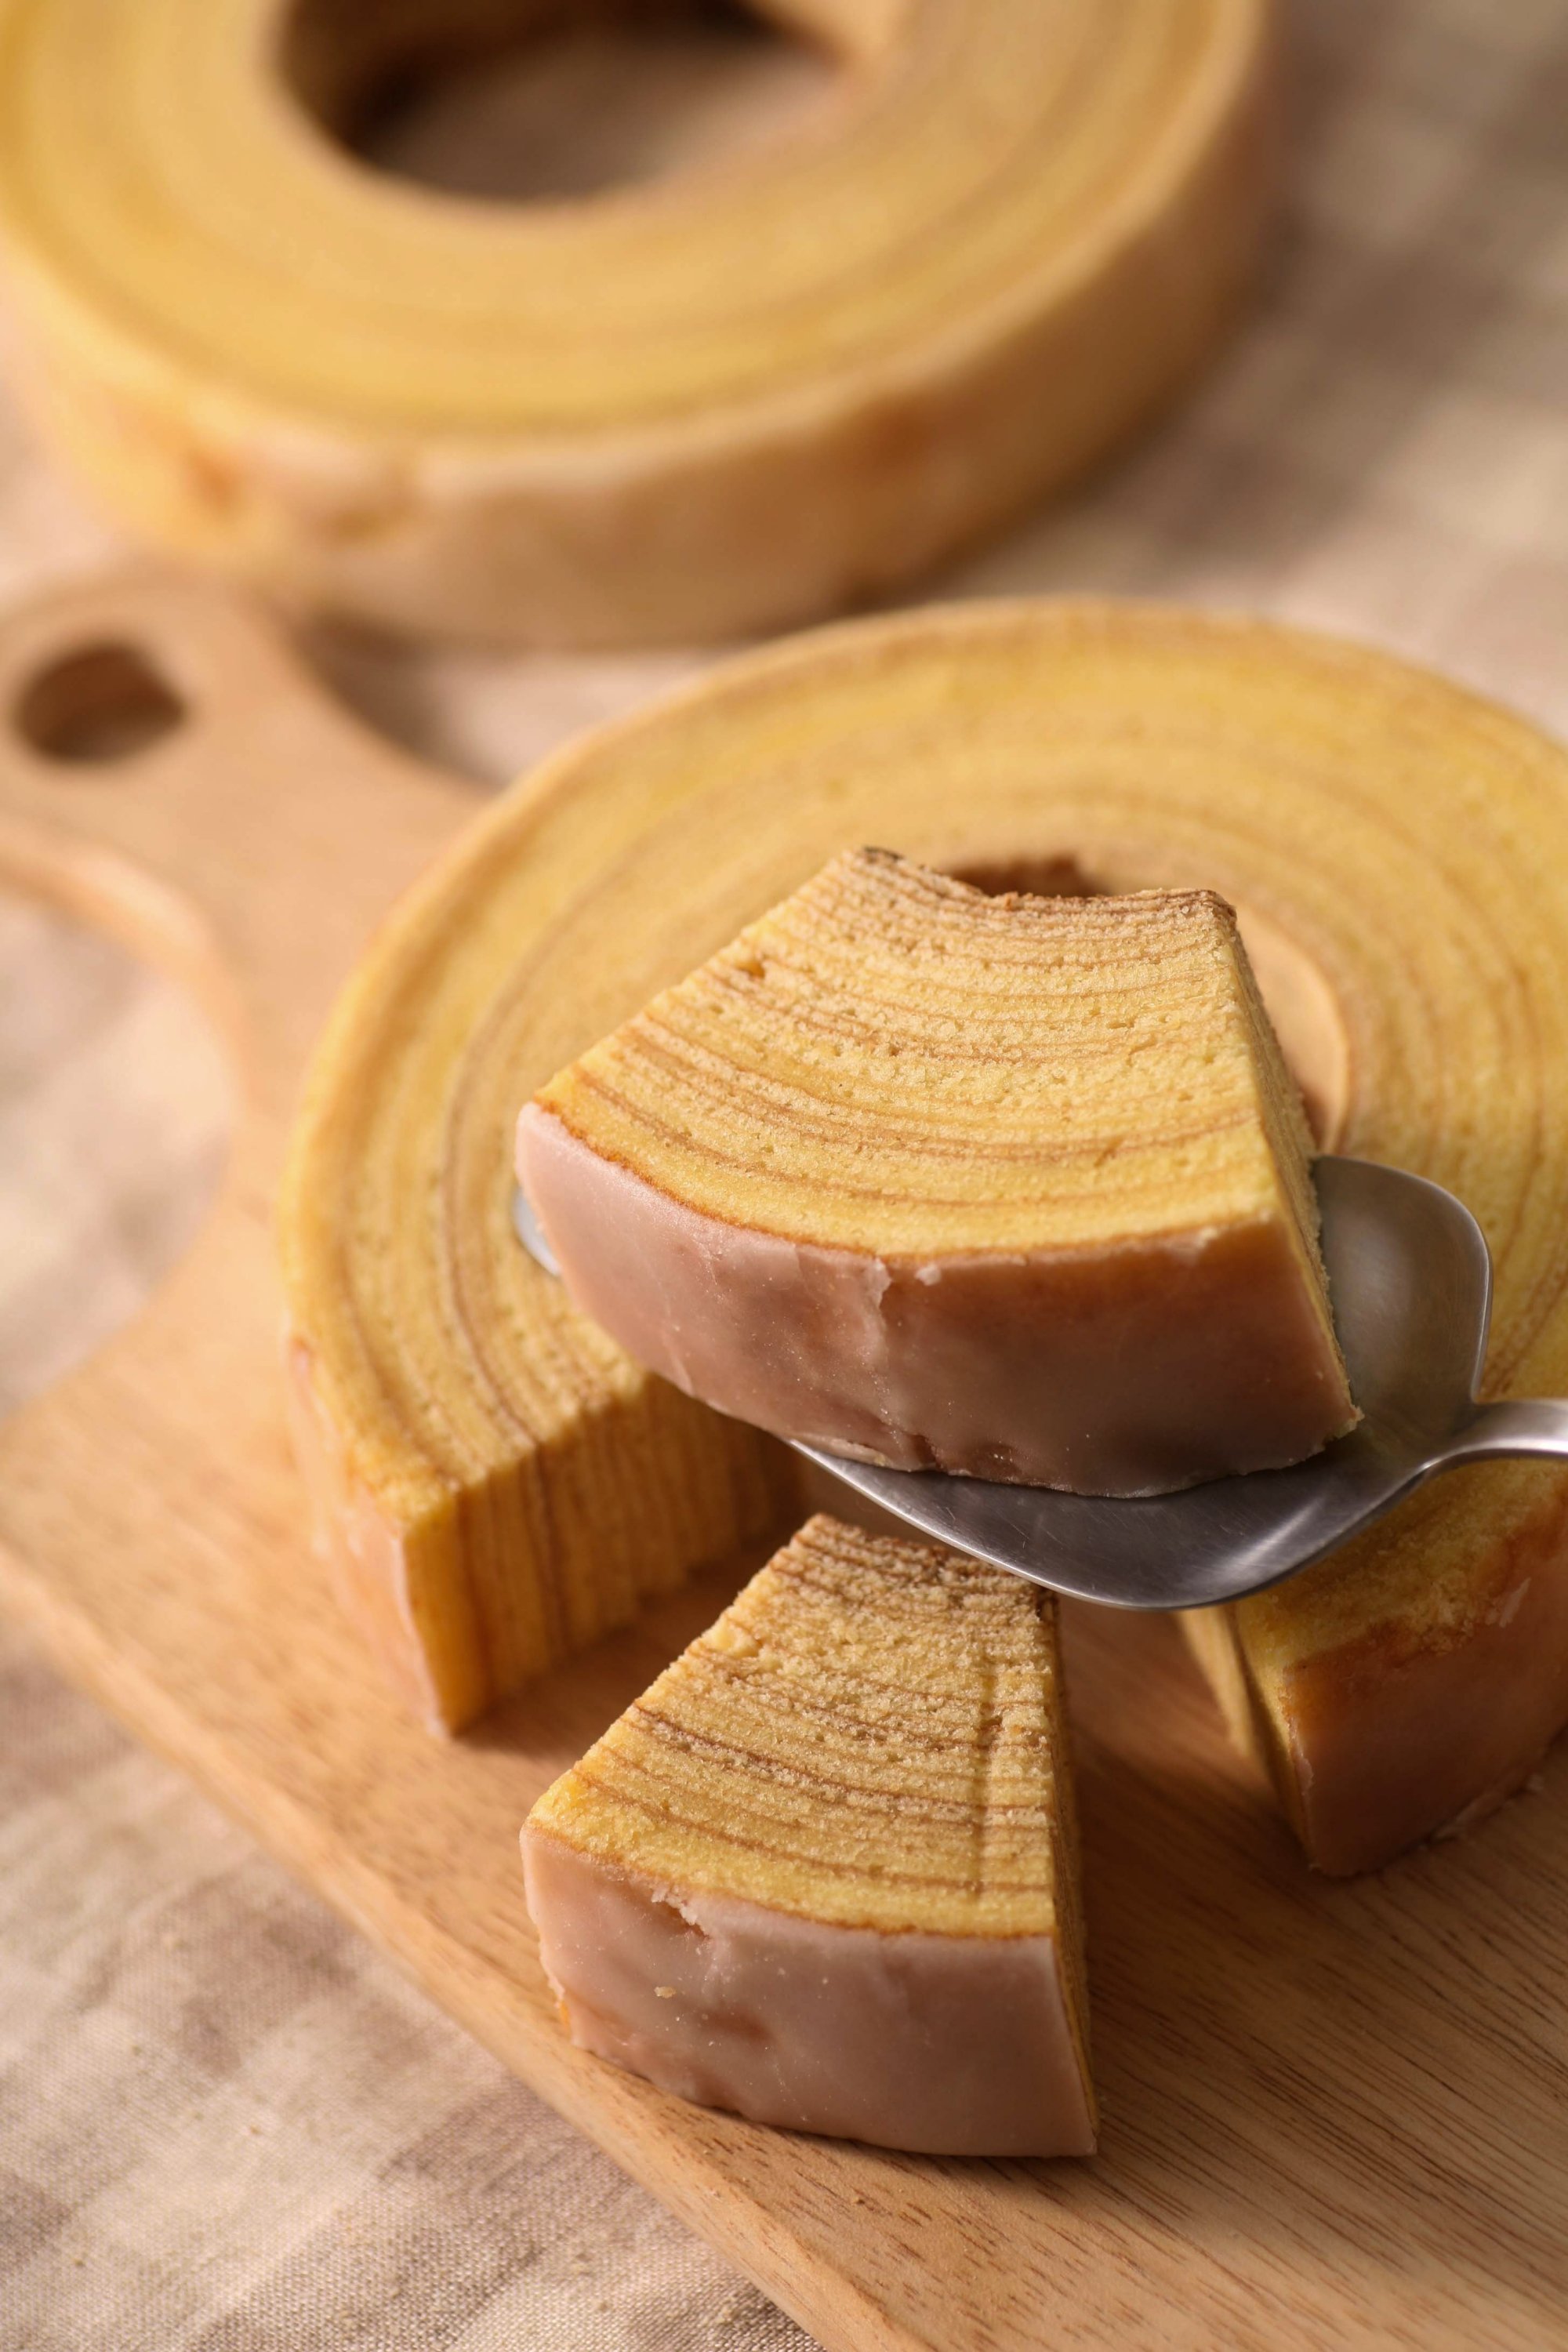 Baumkuchen is best made with fresh unsalted butter and eggs. (Shutterstock Photo)